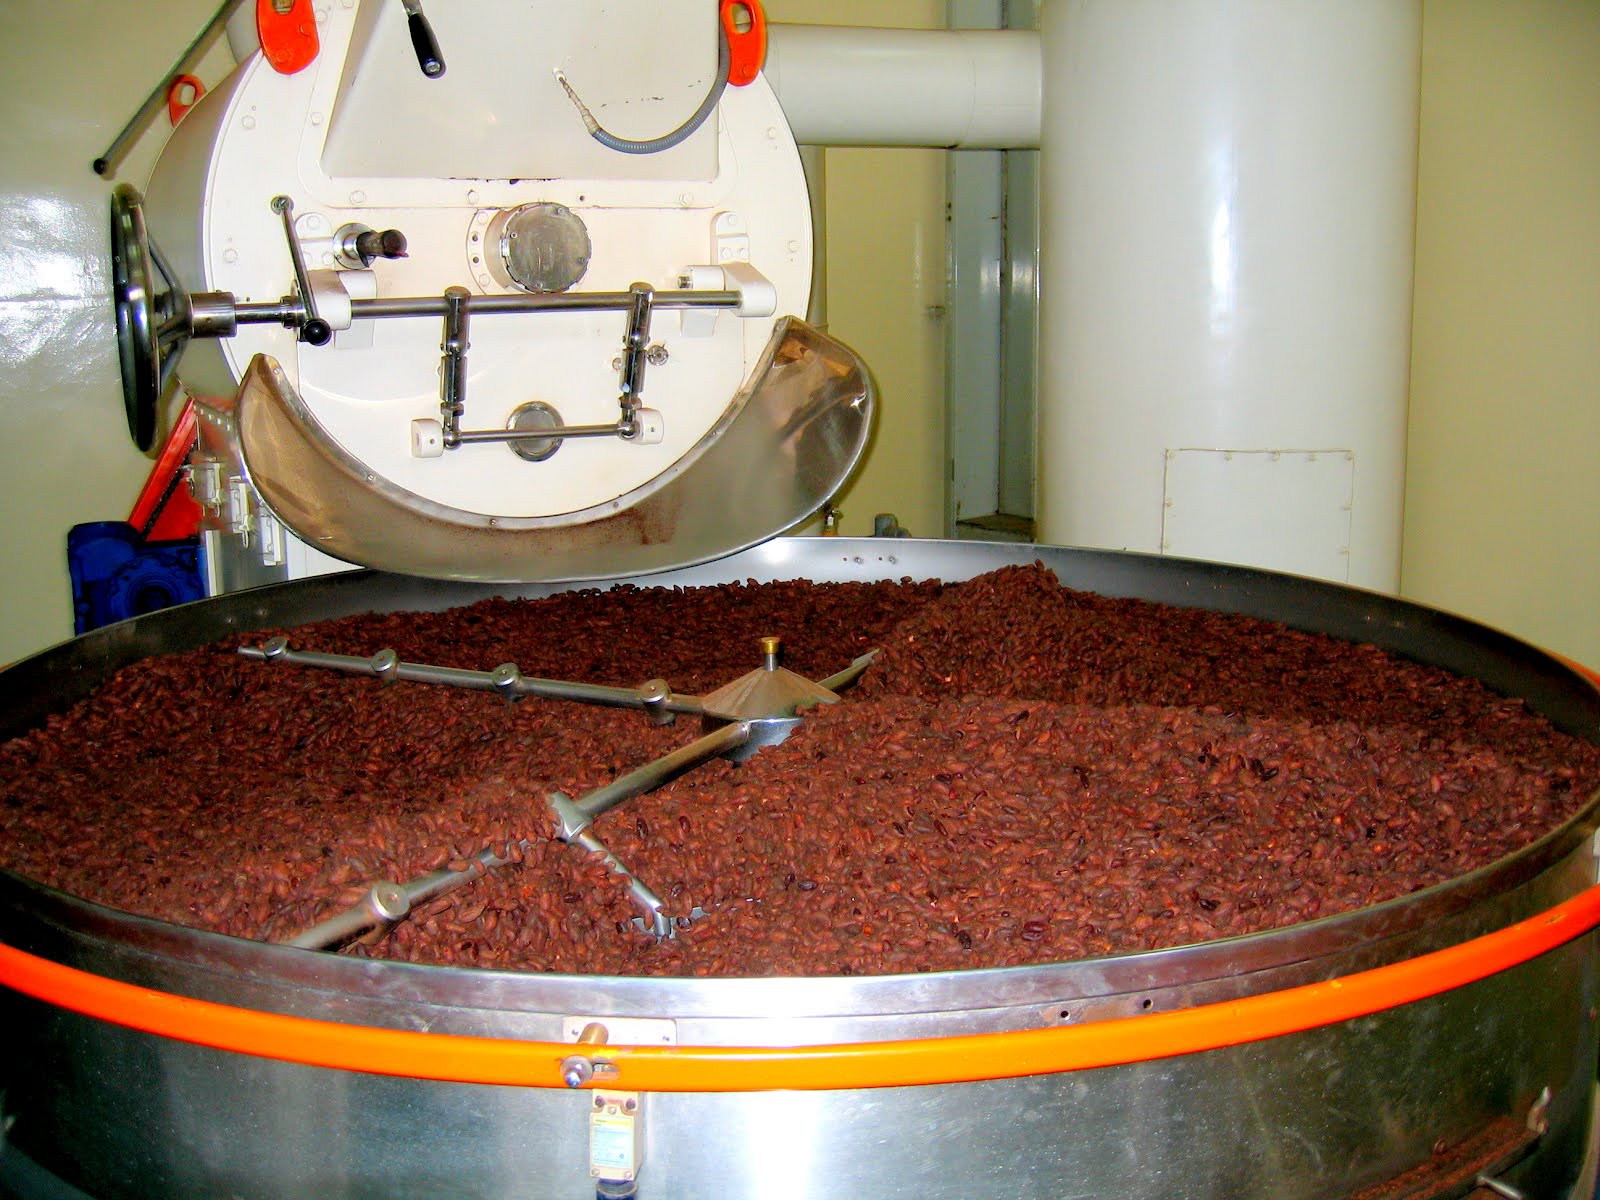 CHOCOLATE MANUFACTURING AND DISTRIBUTION BUSINESS PLAN IN NIGERIA